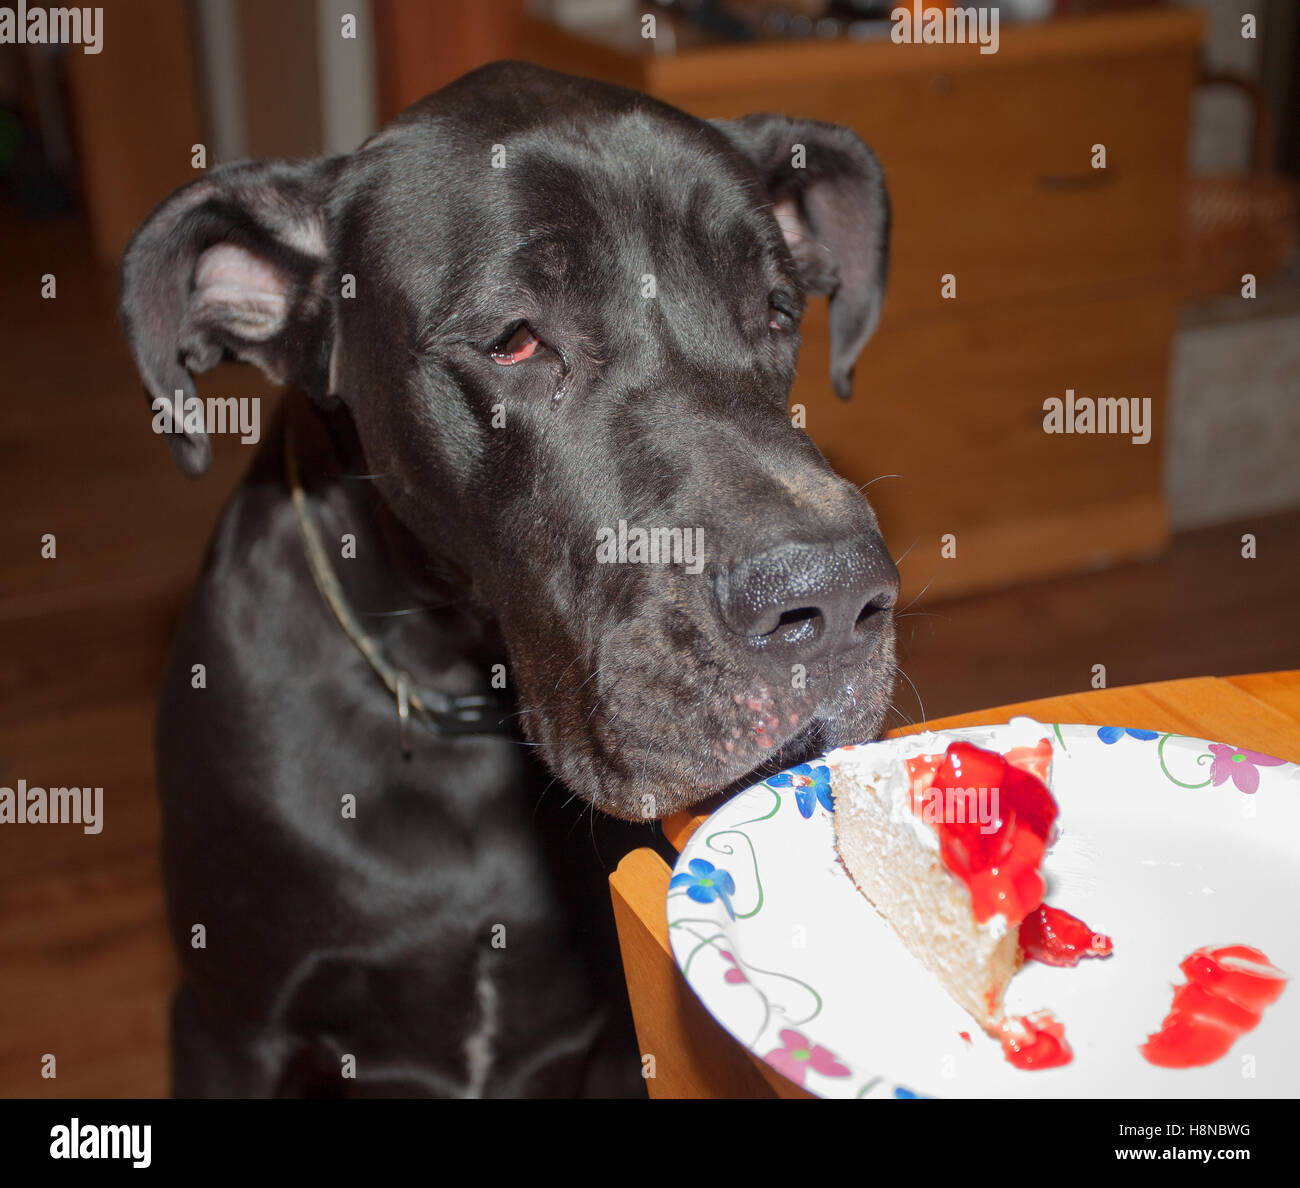 Black Great Dane that is eyeing some cake on the table Stock Photo